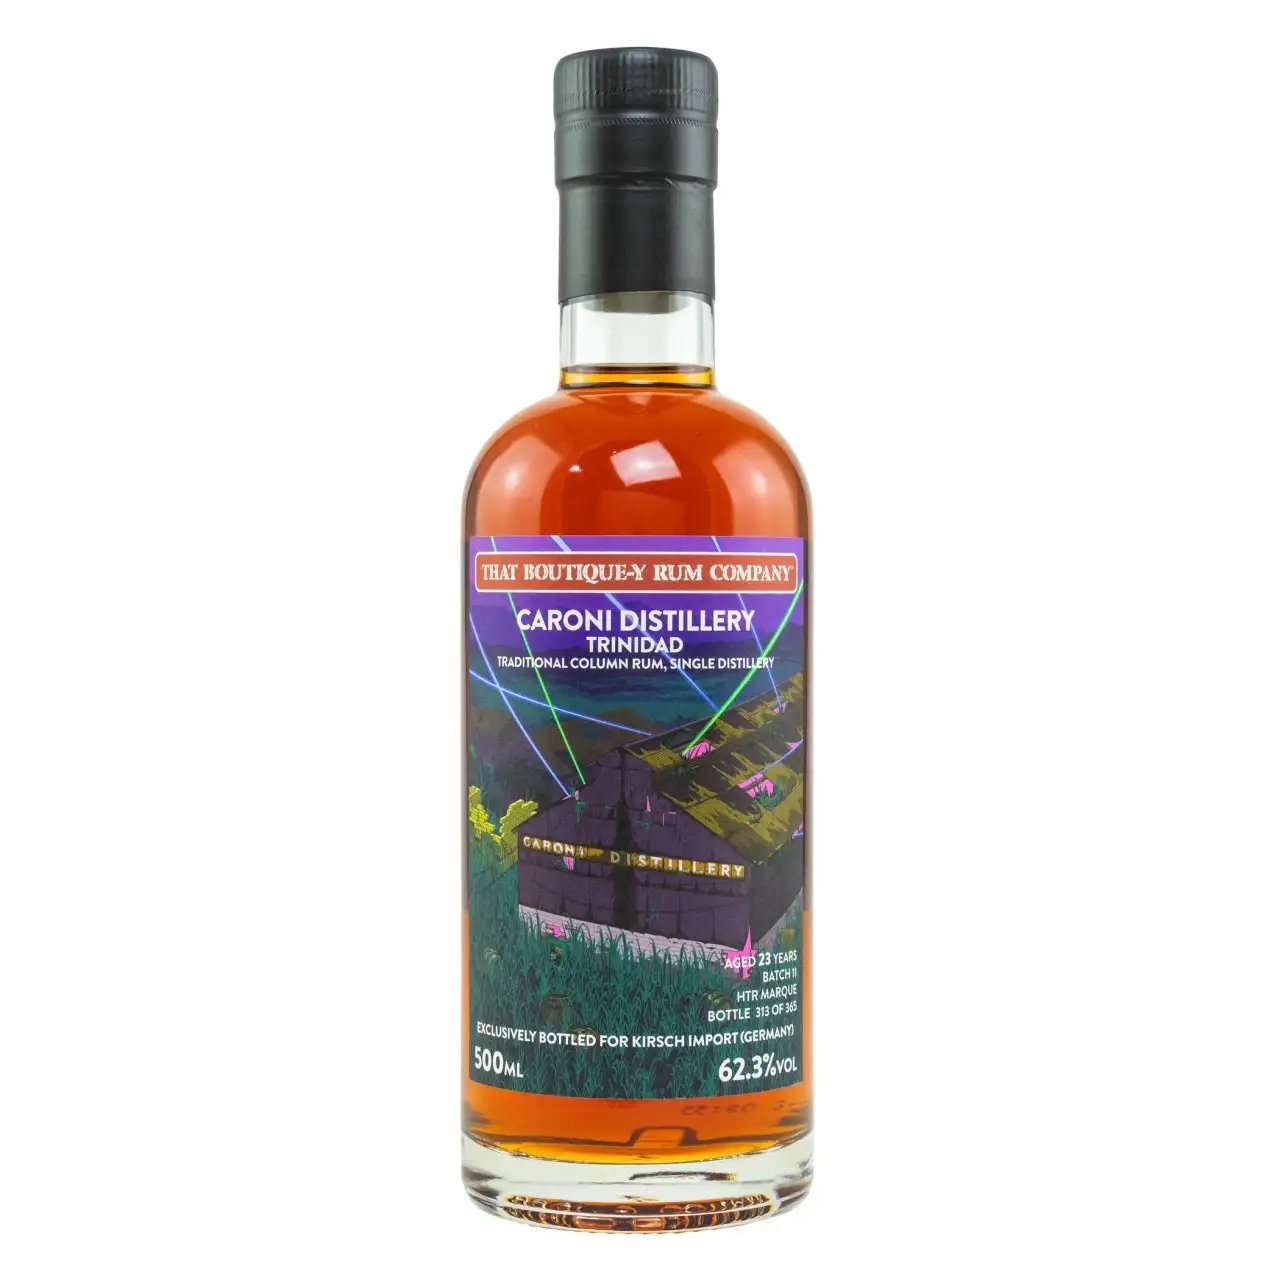 Image of the front of the bottle of the rum Caroni Distillery Heavy Trinidad Rum